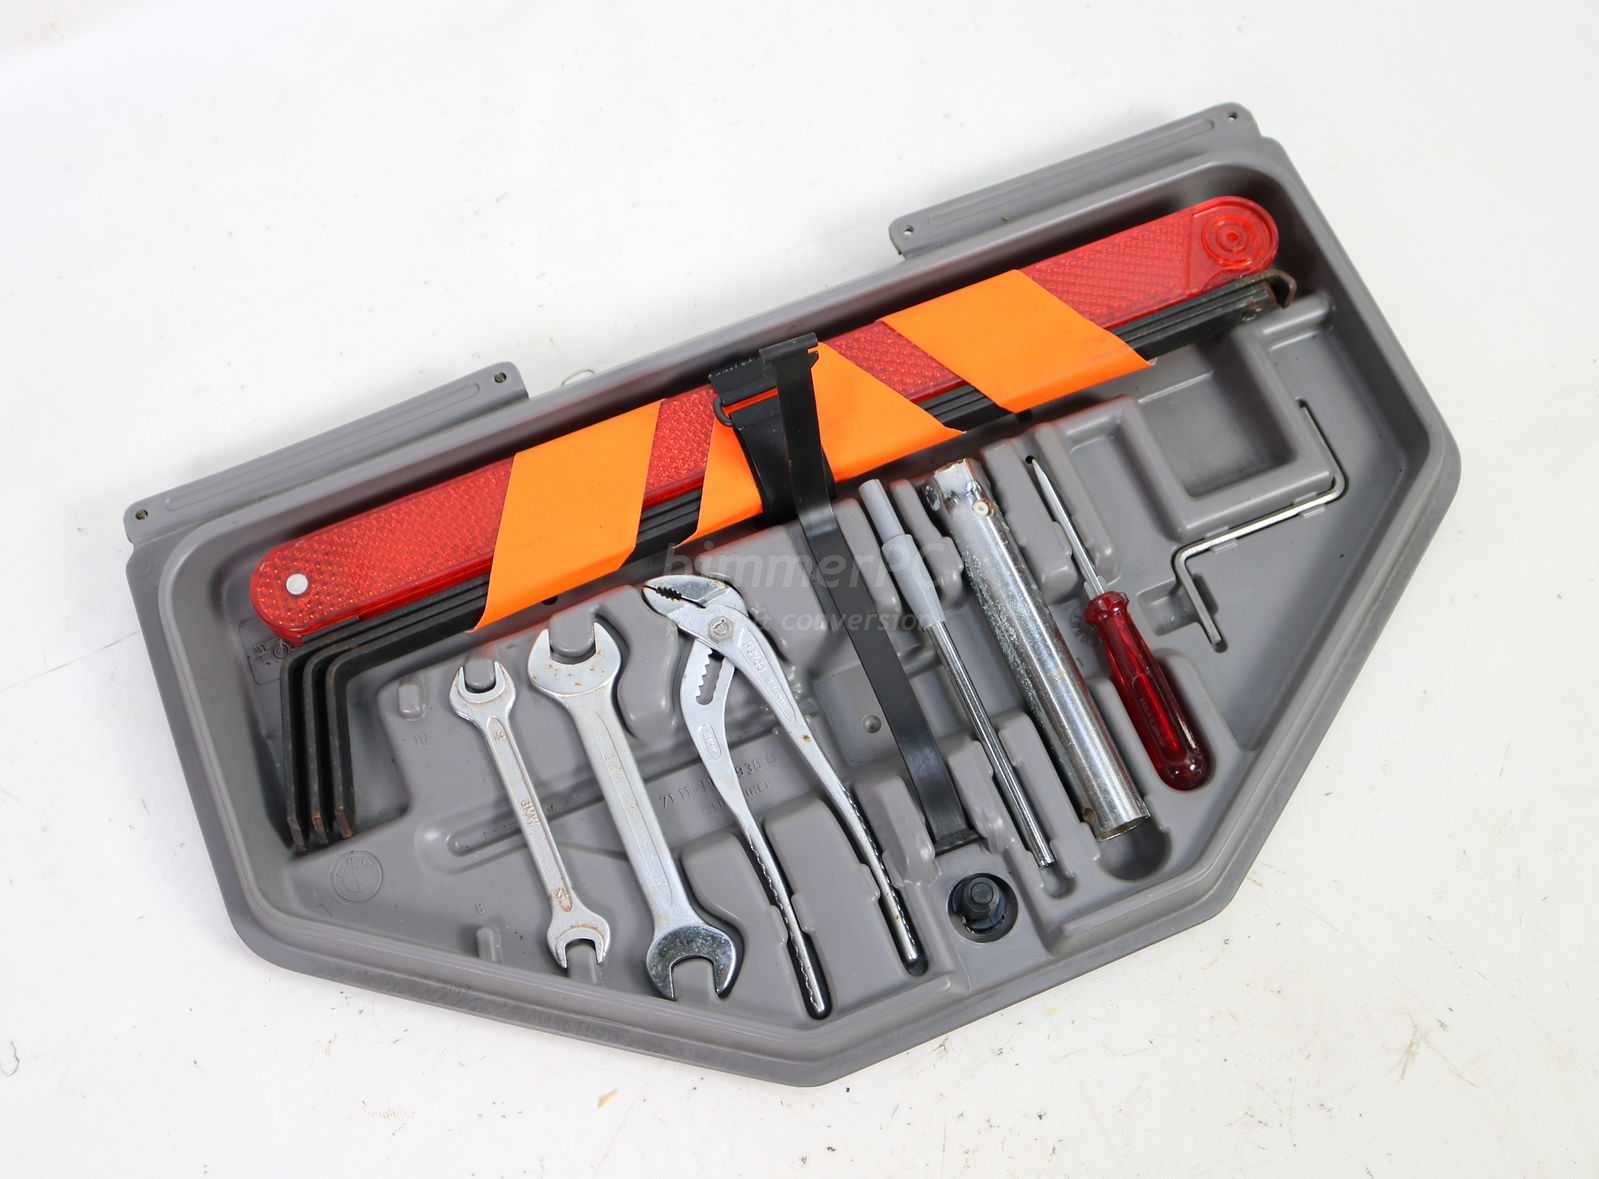 BMW E32 E28 Factory Tool Kit Red Screwdriver Wrenches Pliers Heyco  1988-1995 OEM